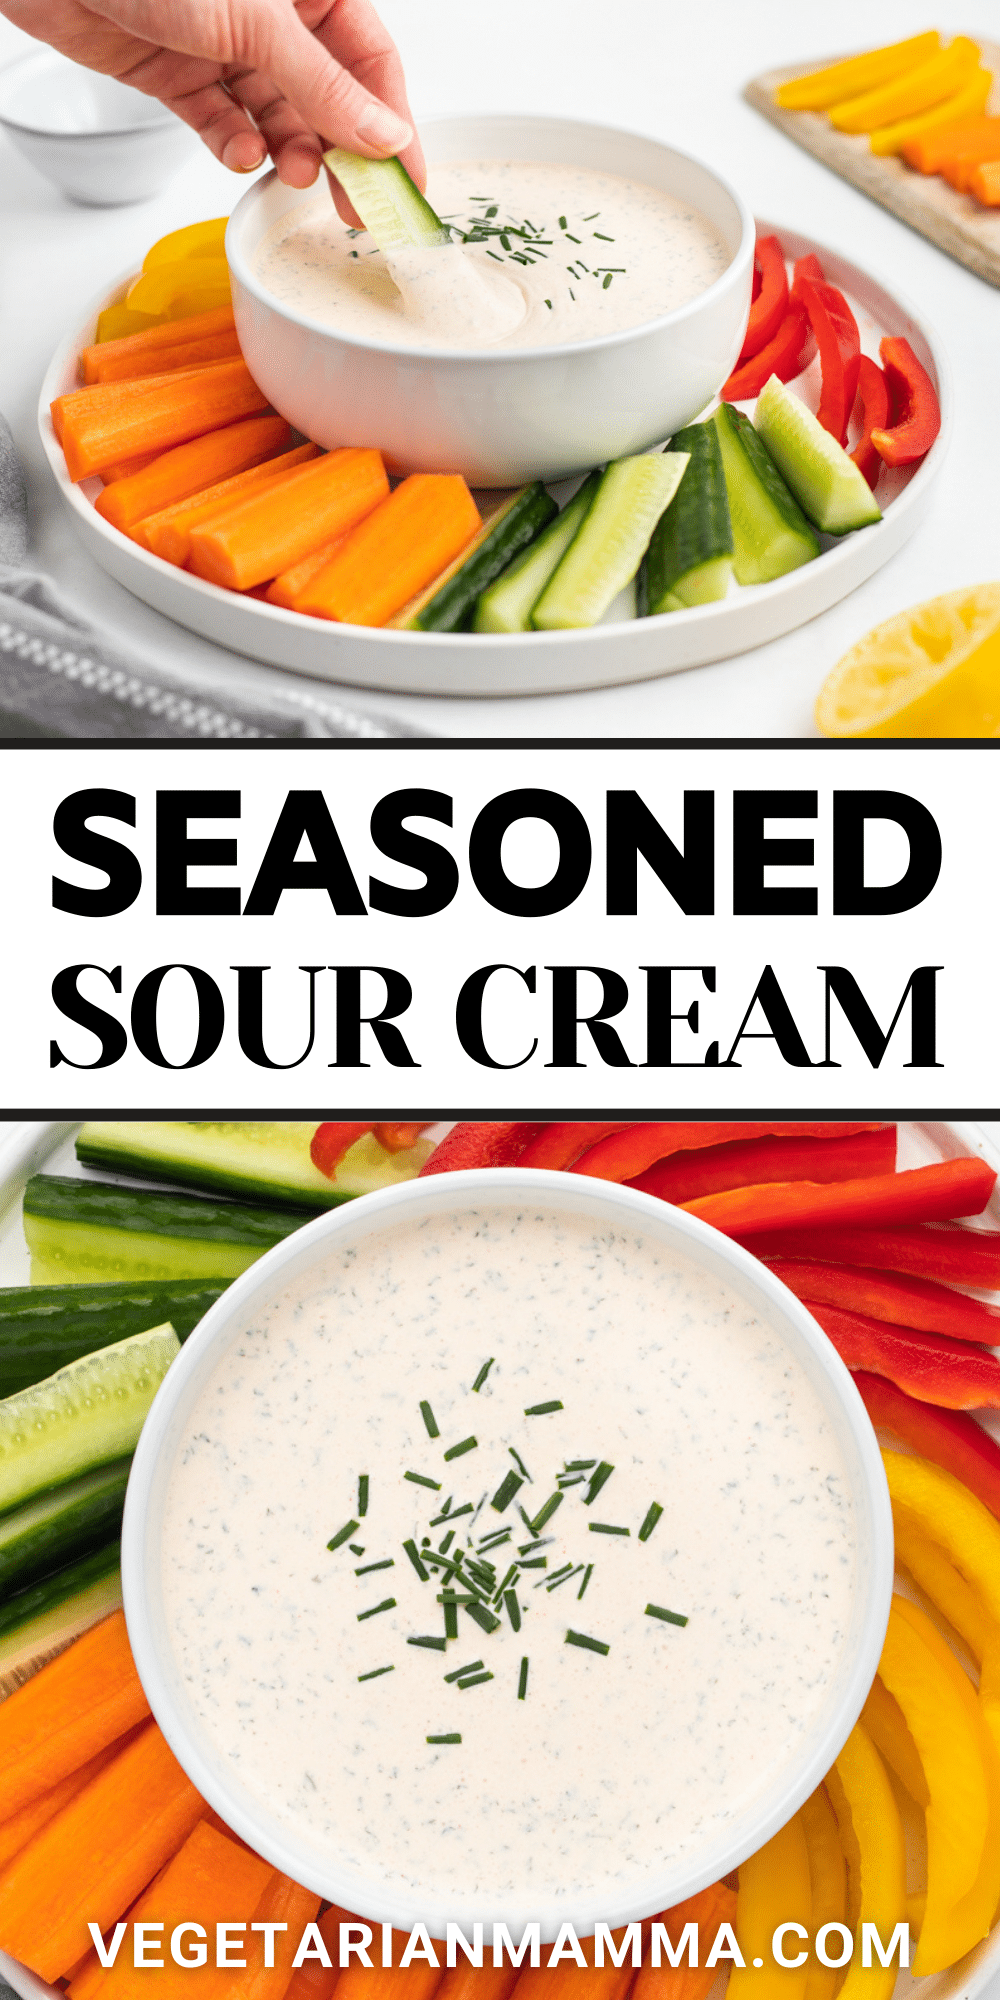 An incredibly easy and super tasty recipe for Seasoned Sour Cream can be whipped up in just a few minutes! It's perfect as a dip for veggies, or as a topping for your favorite Mexican recipes.